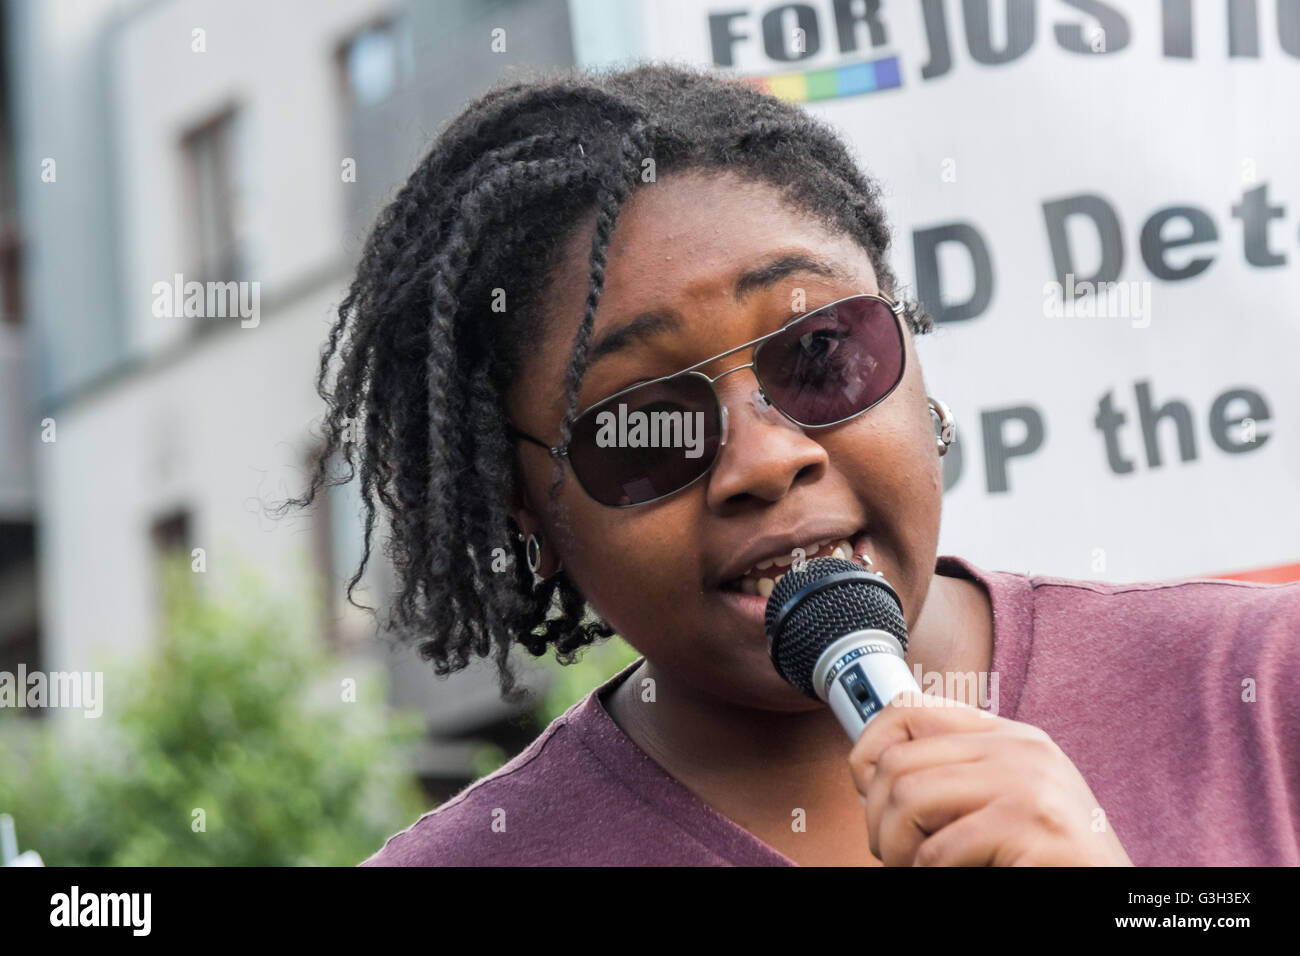 London, UK. June 24th 2016. A Black activist speaks at the rally in Altab Ali Park on the day after the UK voted to leave the EU against racism, for migrant rights and against fascist violence. They say that migration and immigrants have been attacked and scapegoated not only by both Remain and Leave campaigns but by mainstream parties and media over more than 20 years, stoking up hatred by insisting immigrants are a 'problem'. Peter Marshall/Alamy Live News Stock Photo